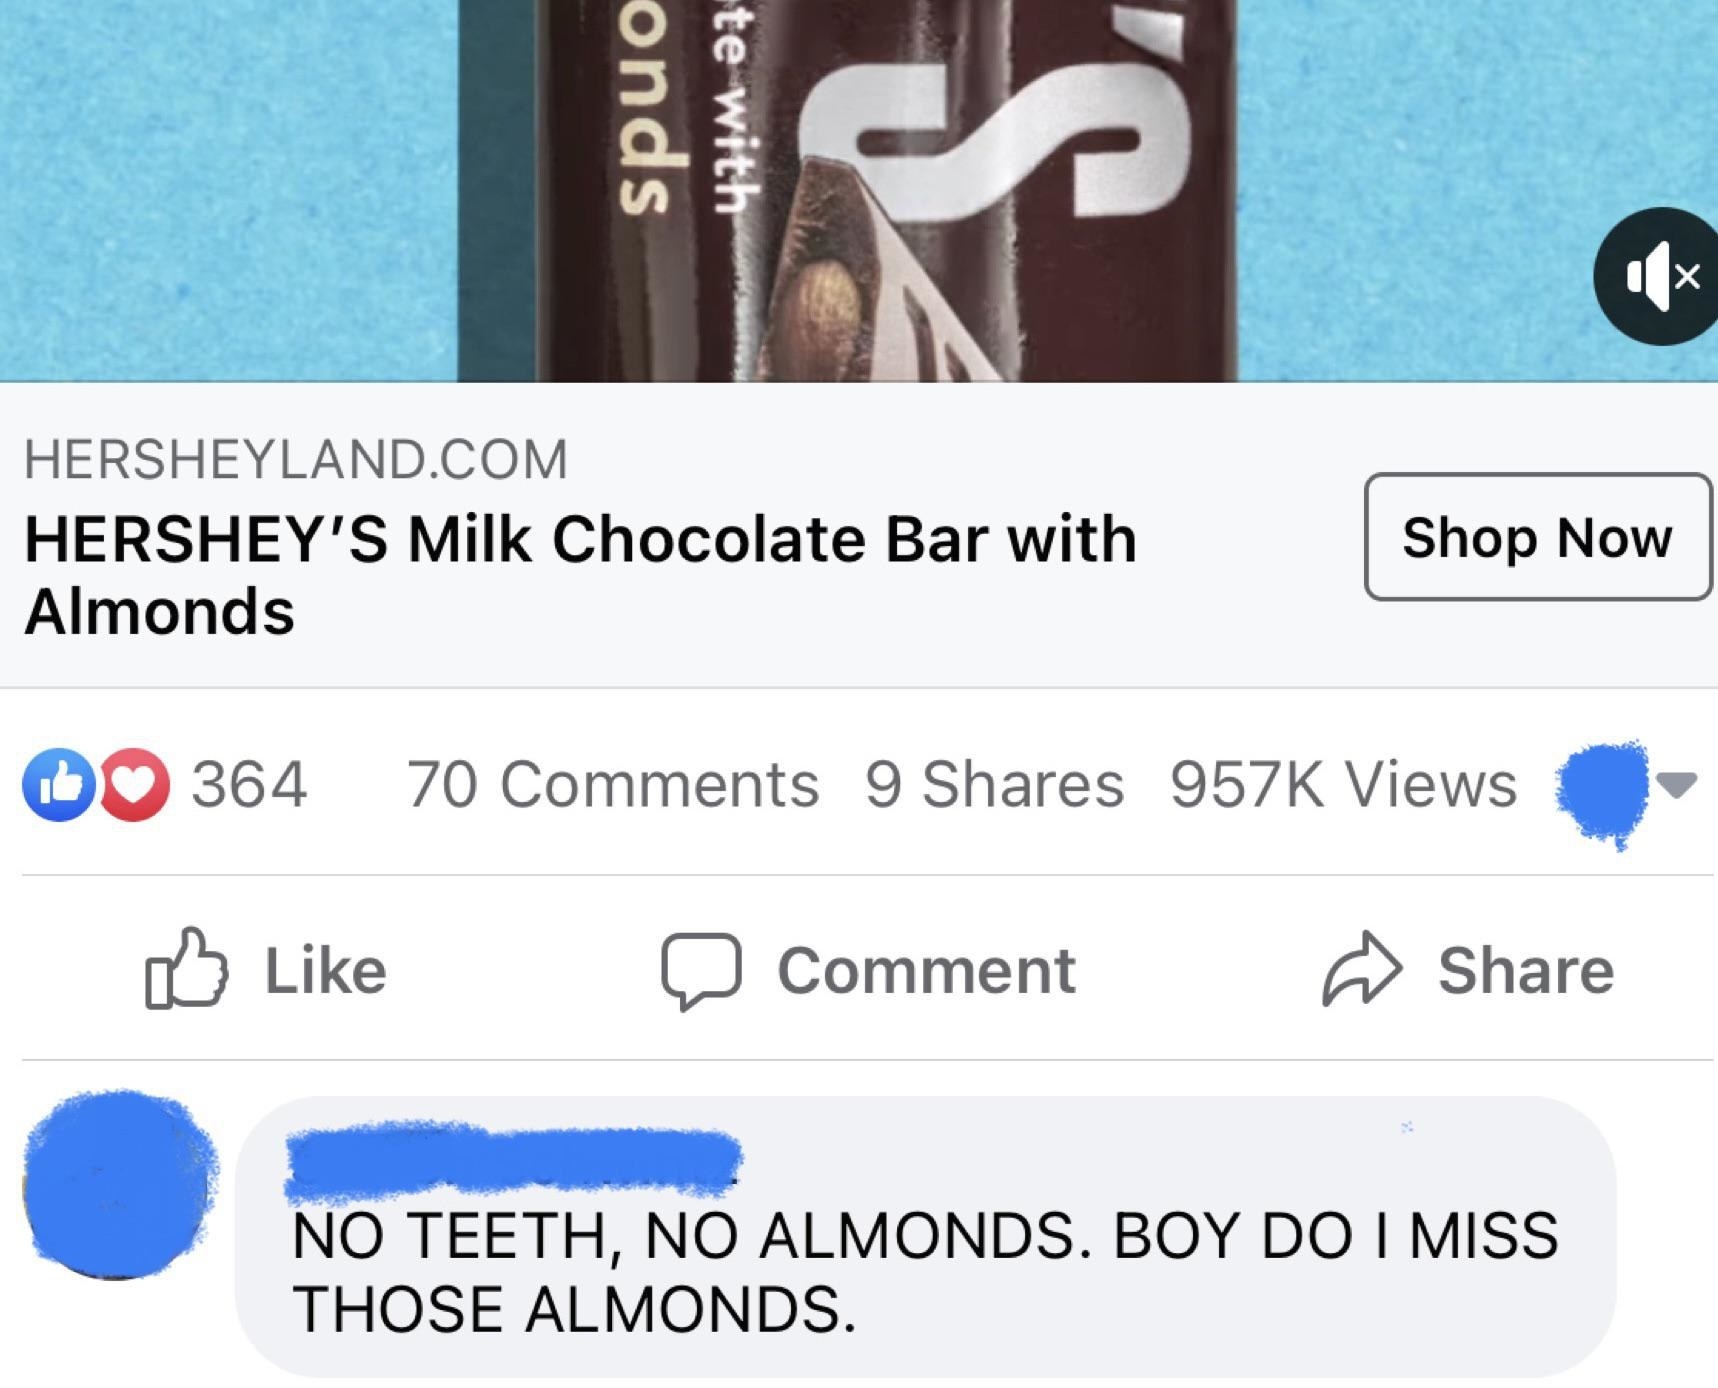 person commenting on a chocolate bar adds that because of the almonds they caant eat it